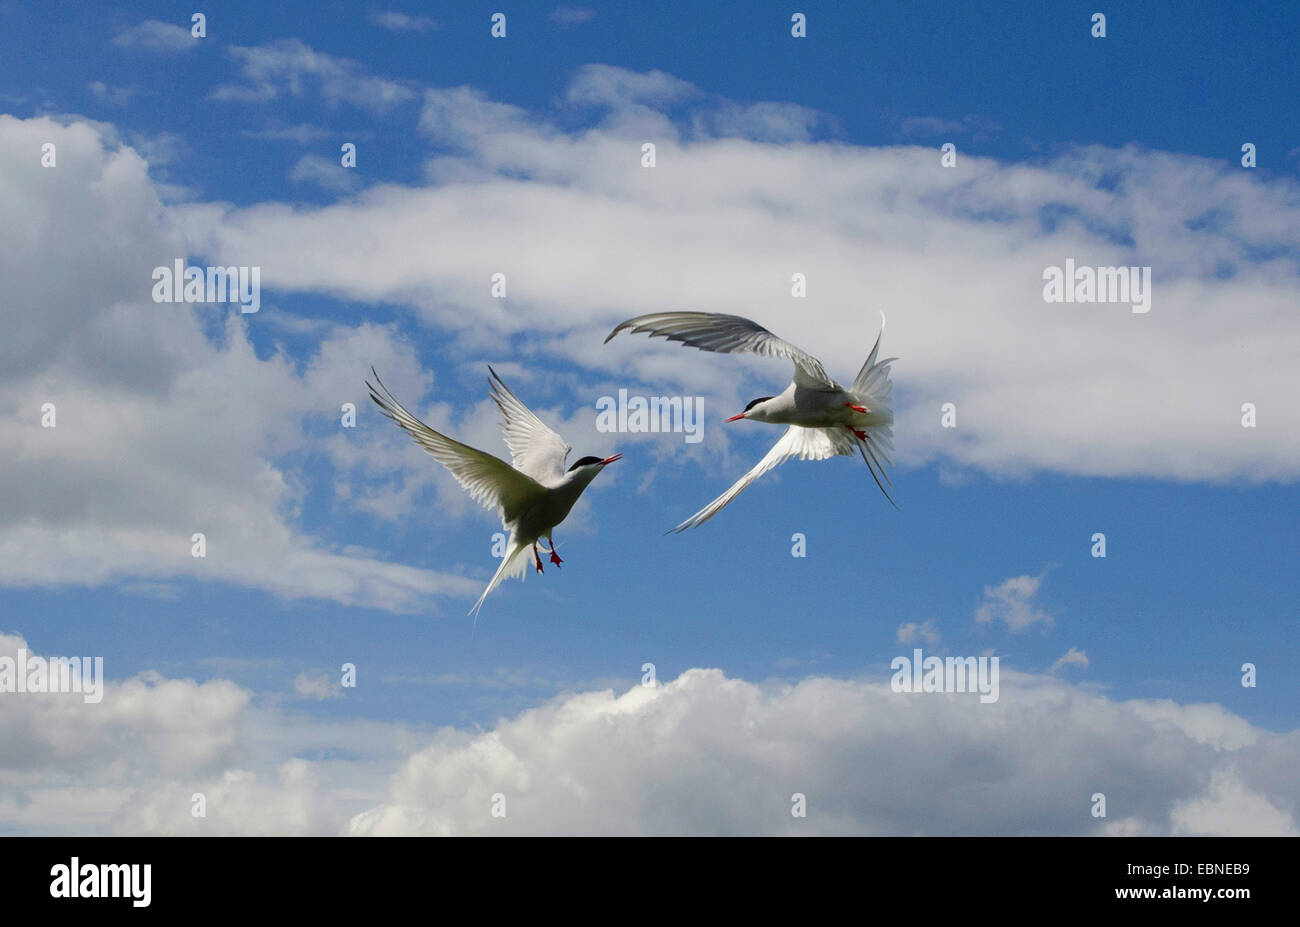 arctic tern (Sterna paradisaea), two artic terns fighting in the sky, United Kingdom, England, Northumberland Stock Photo